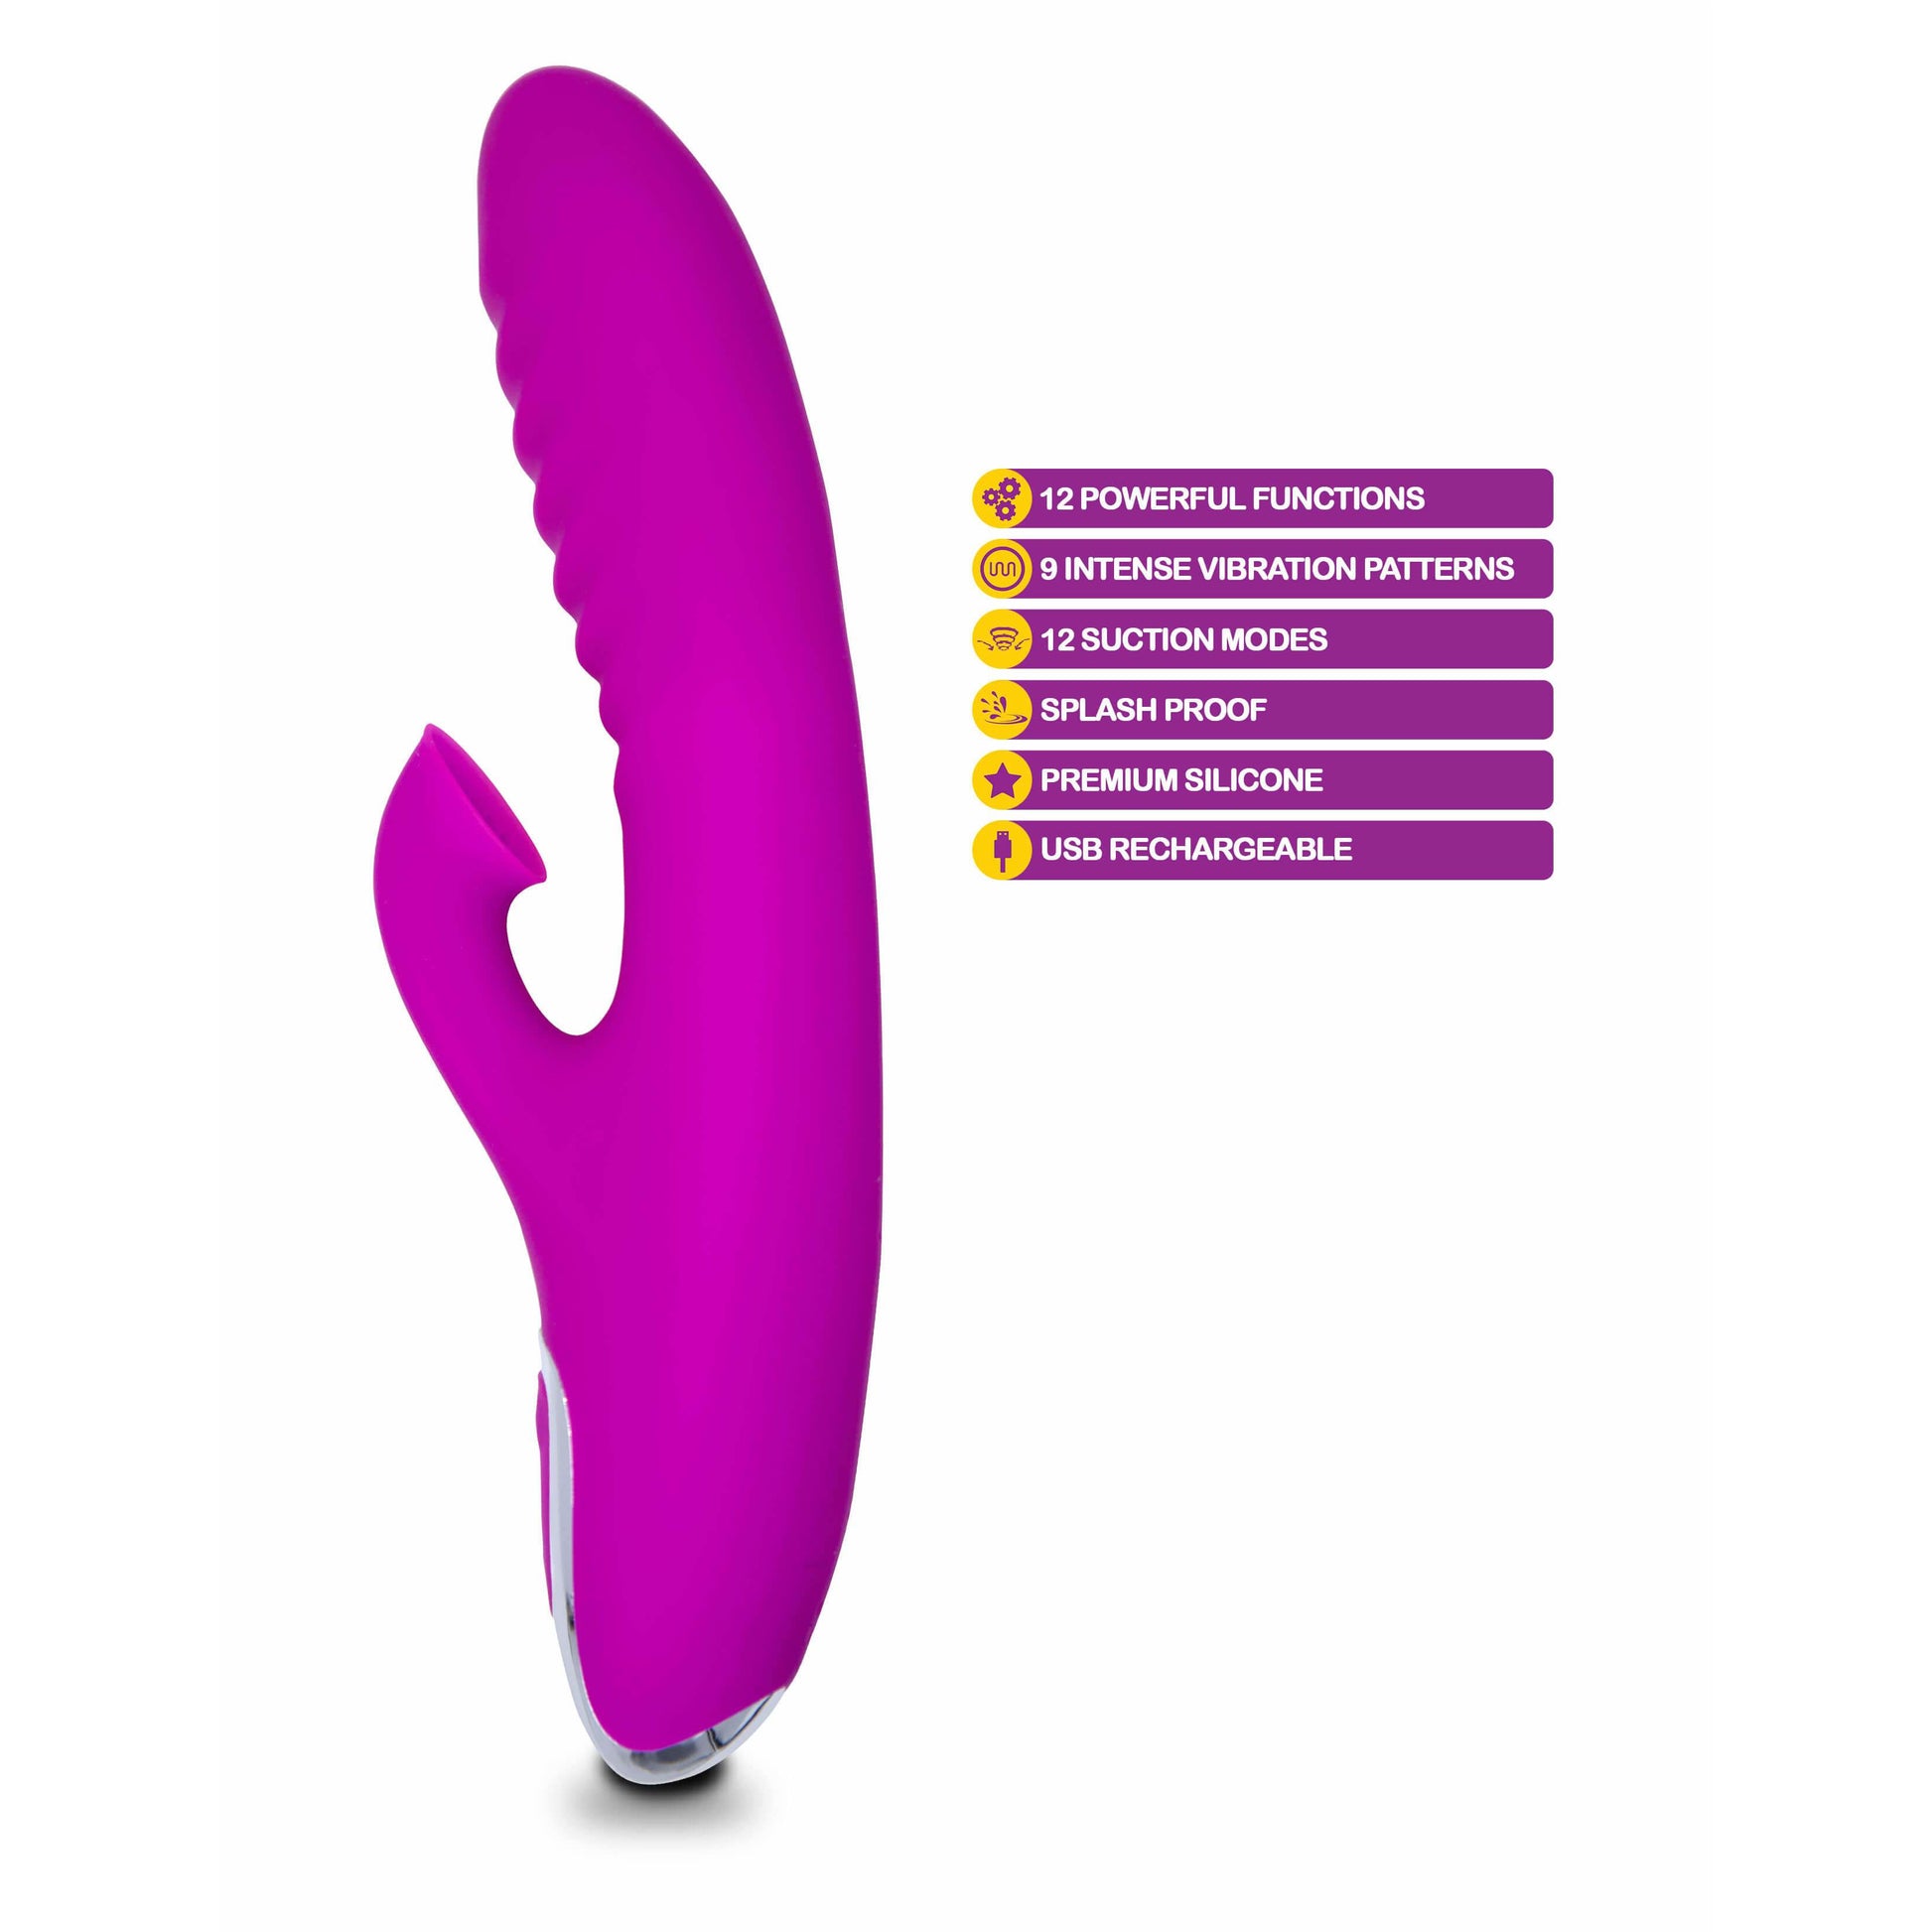 Frenzy Rabbit Vibrator with Clitoral Suction by Viben - The Bigger O - online sex toy shop USA, Canada & UK shipping available